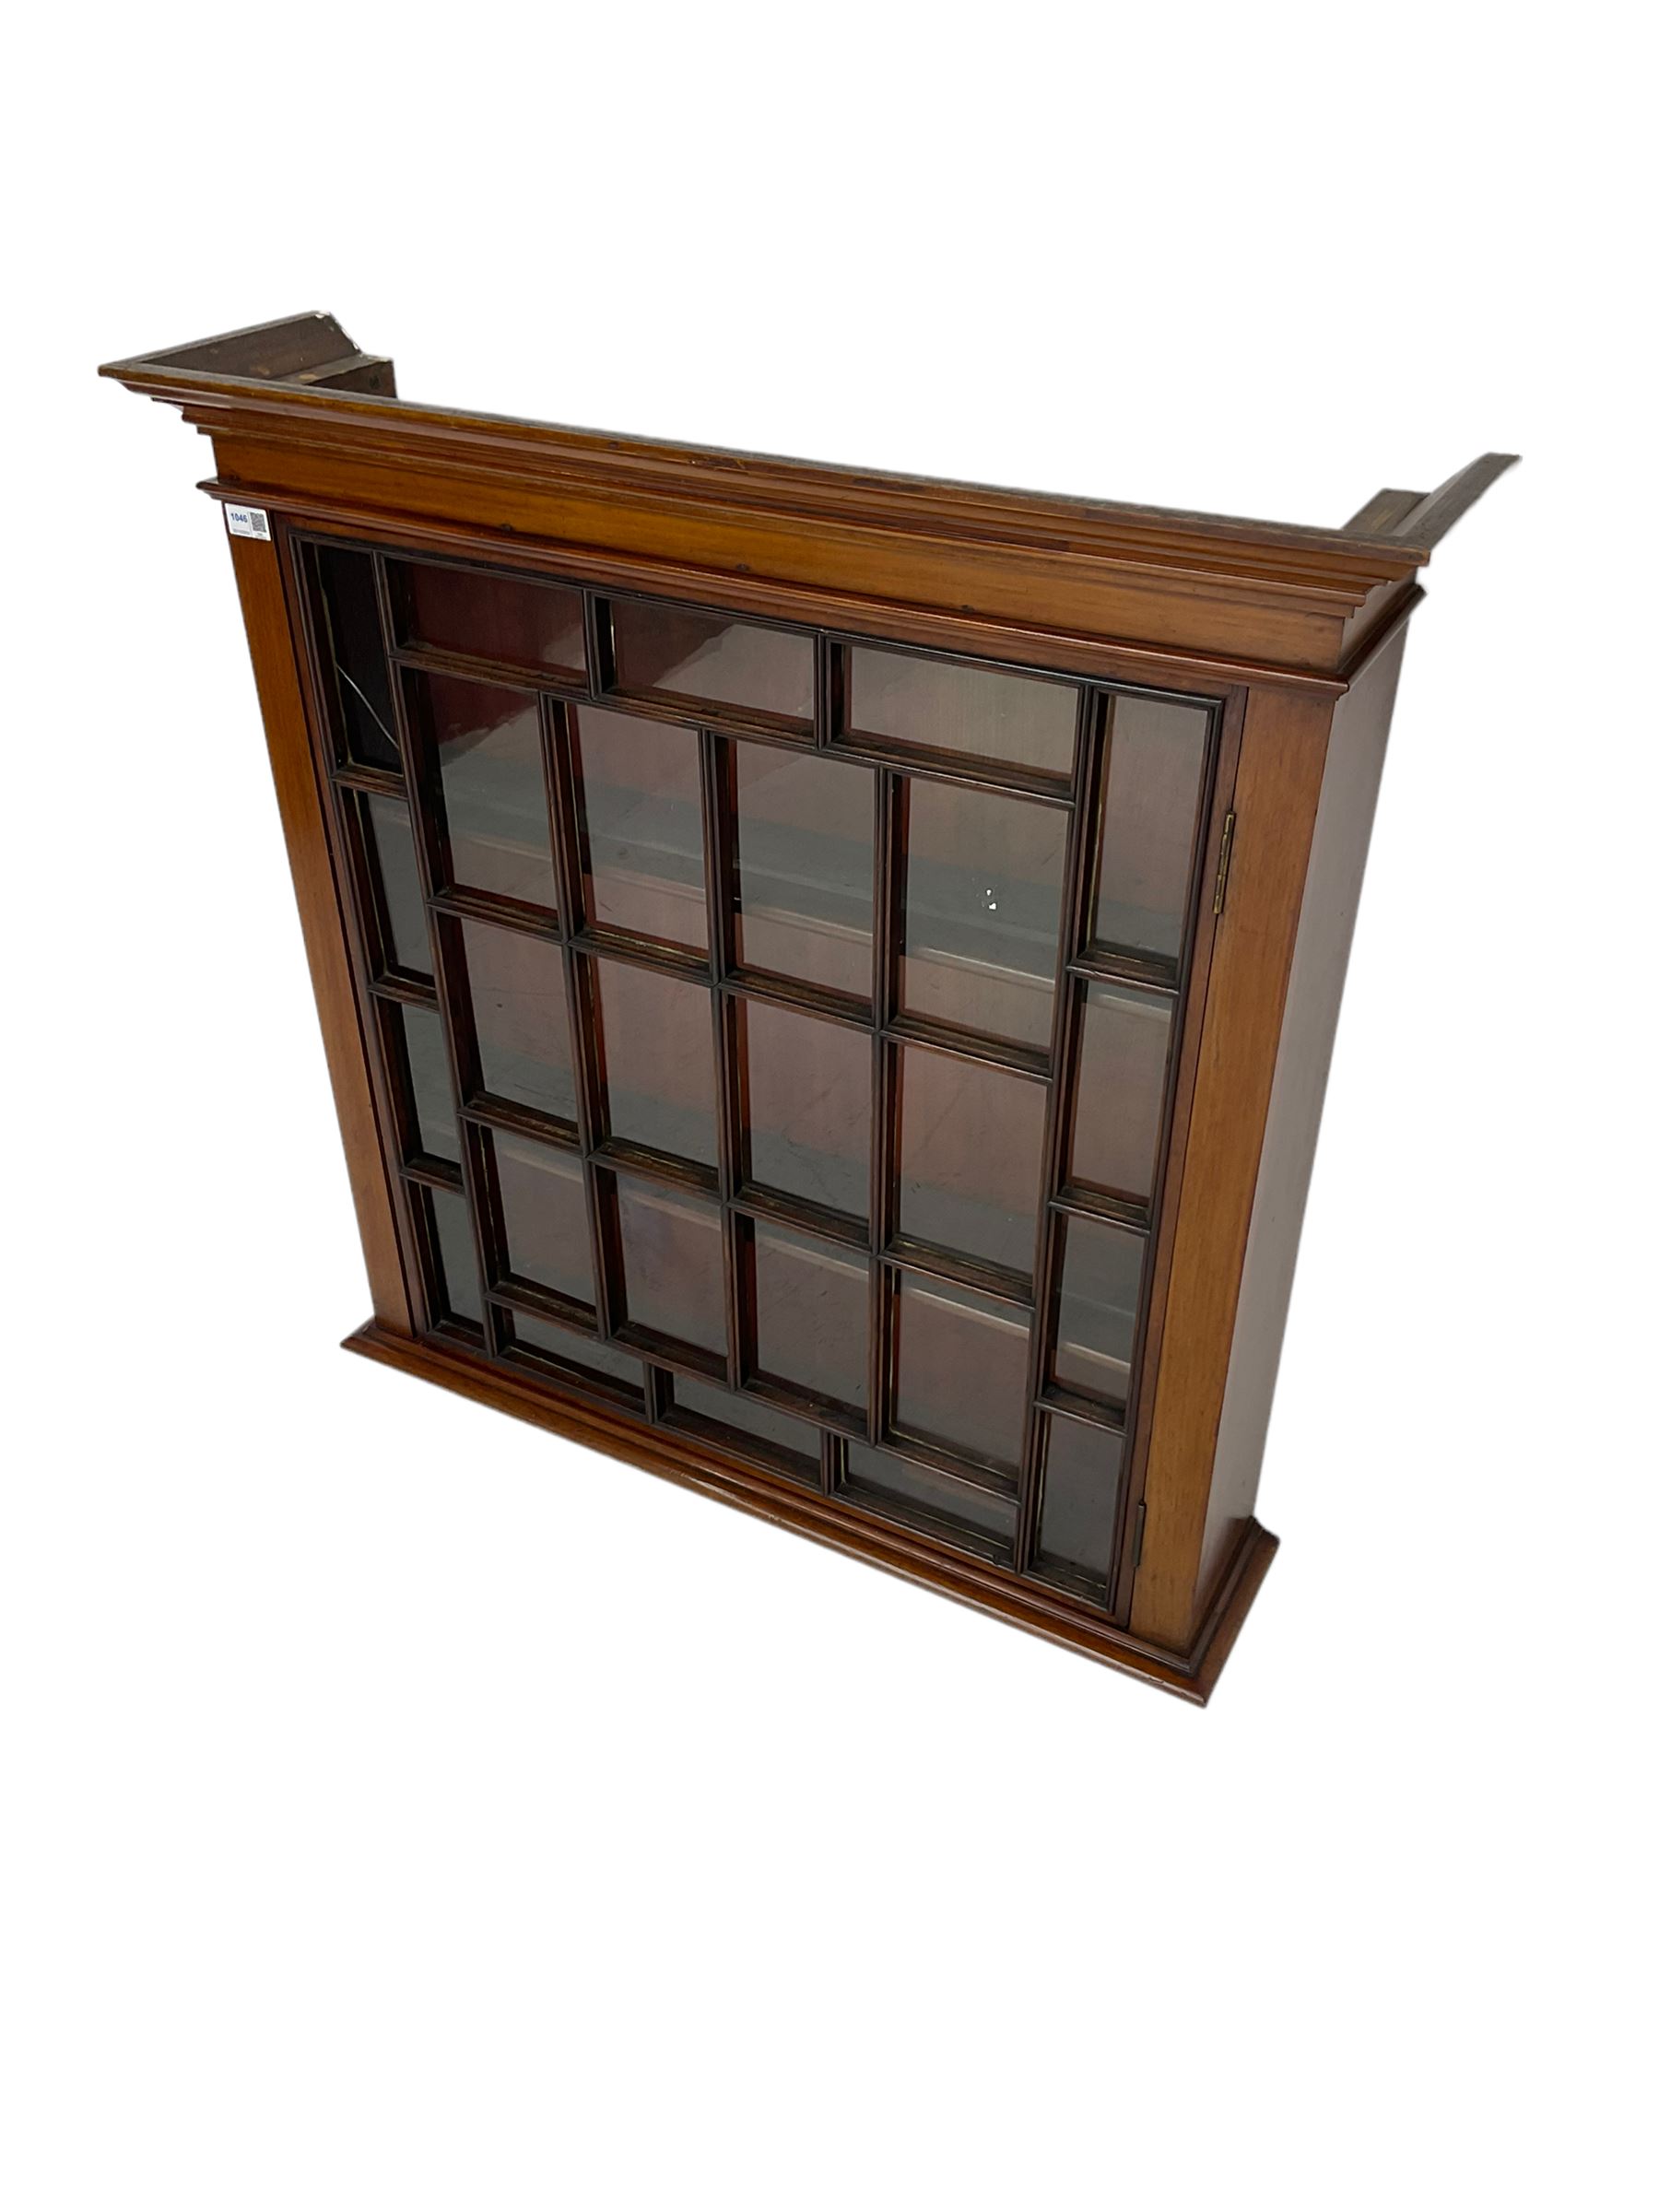 Early 20th century mahogany wall hanging cabinet - Image 2 of 6